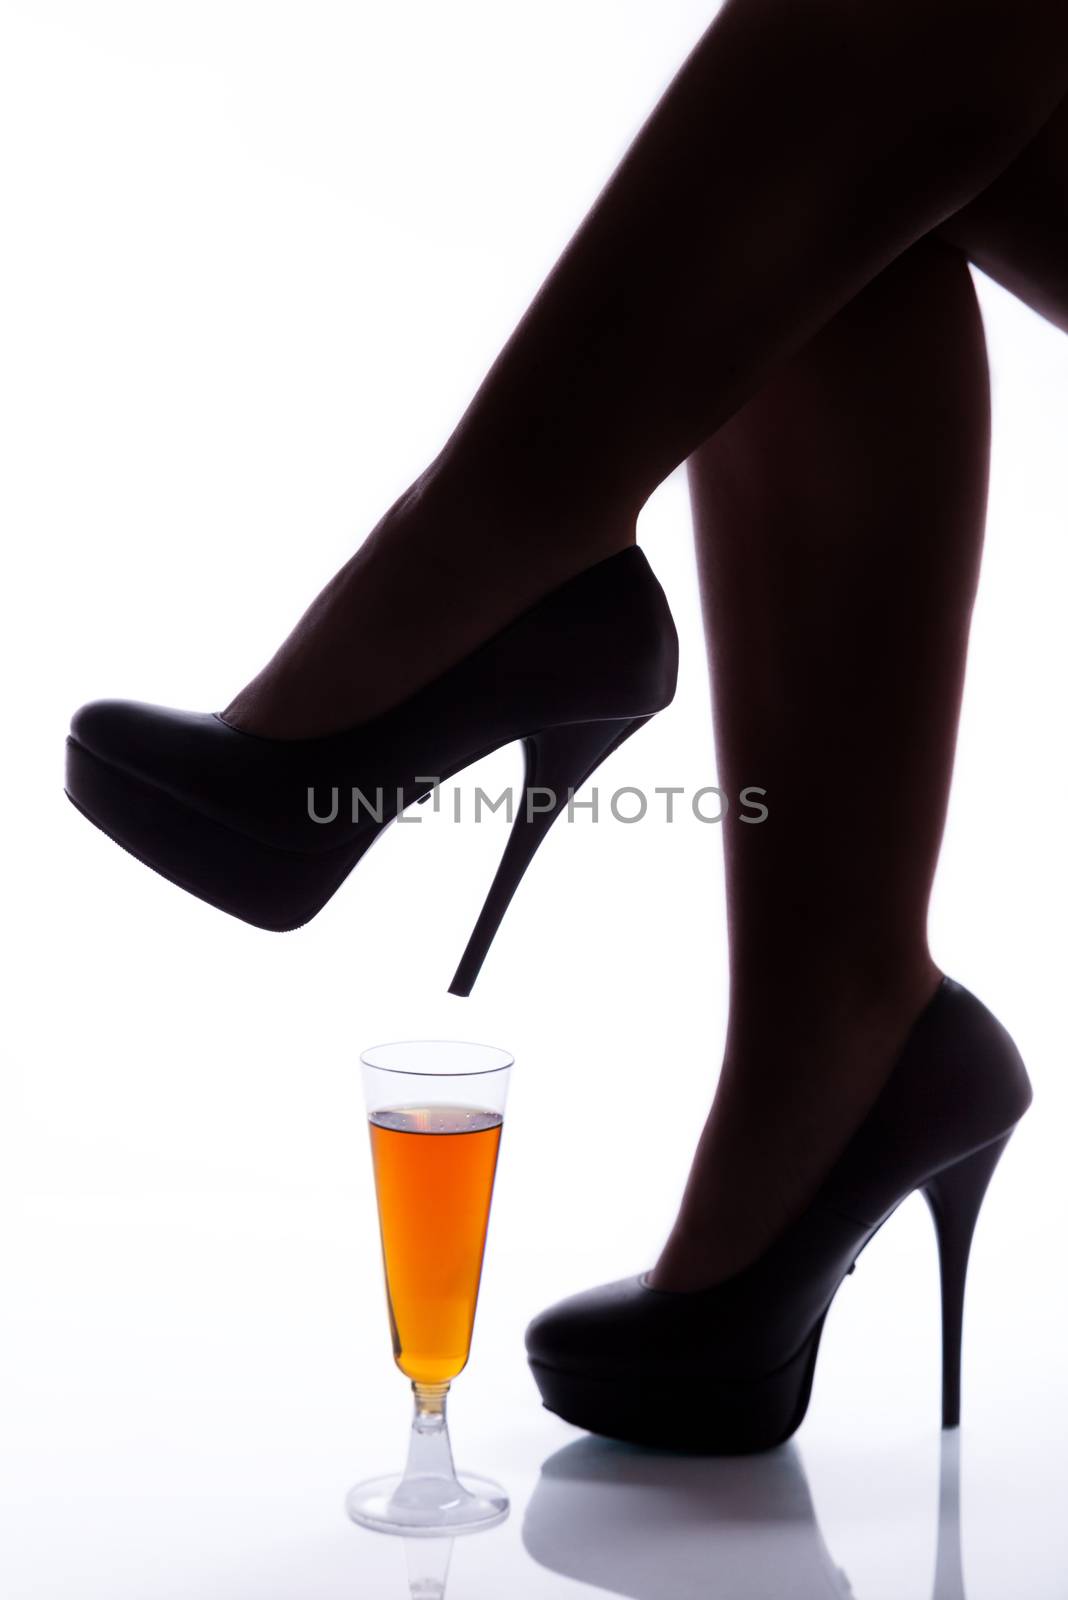 Legs of a woman in high heels over a wine glass by 25ehaag6